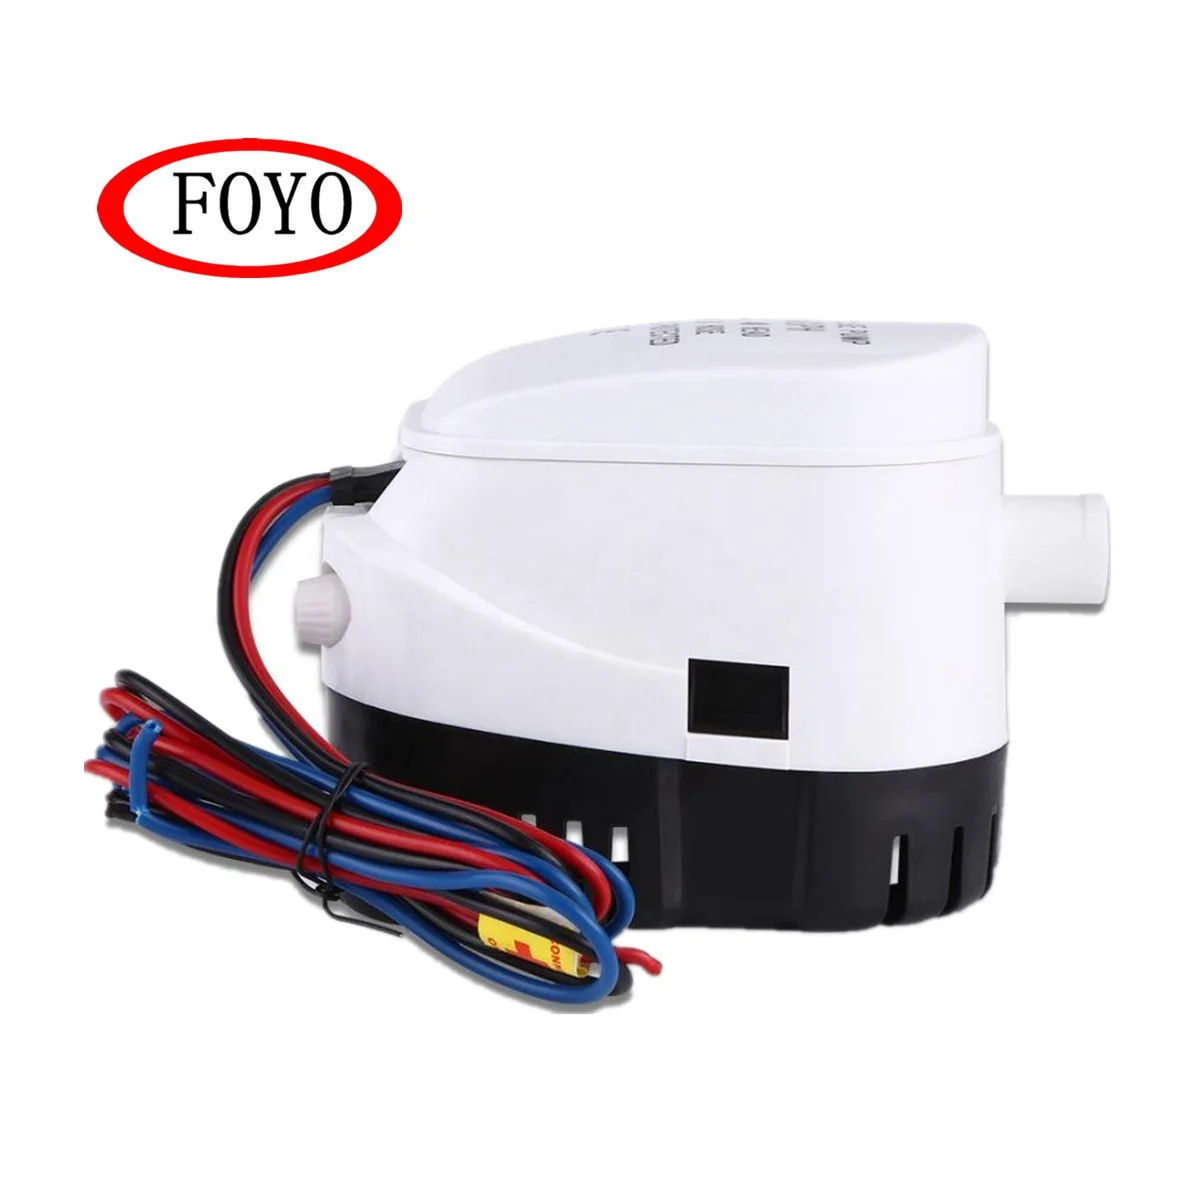 
Foyo Brand Cheap Price Marine 24v 1100GPH Automatic Submersible Boat Bilge Water Pumps for Ponds and Pools and Boat and Yacht 